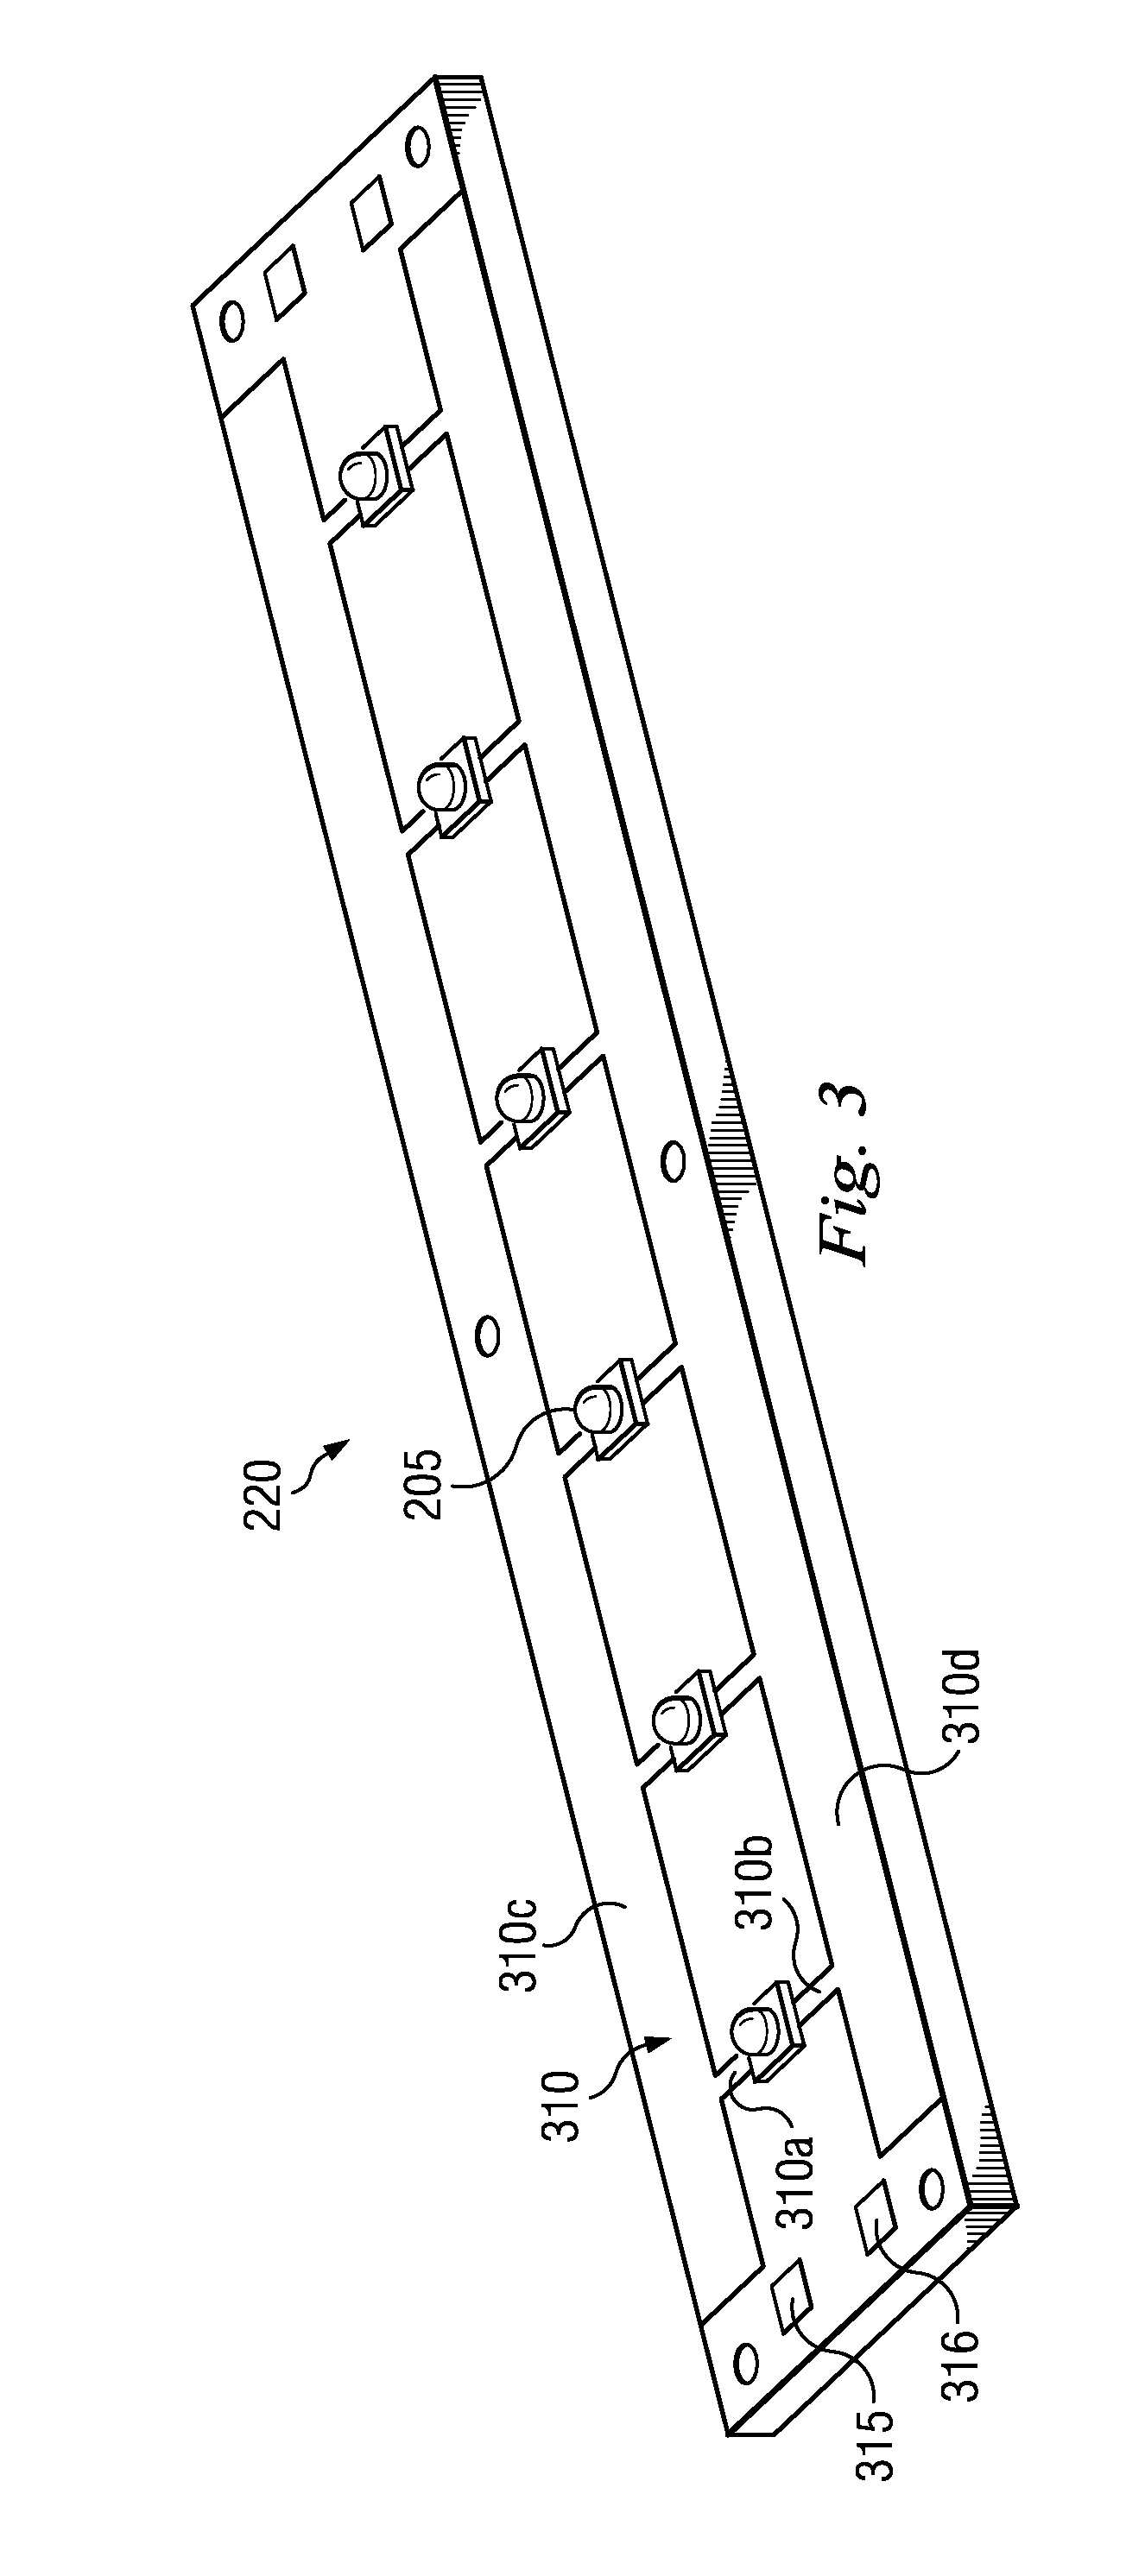 Systems and methods providing thermal spreading for an LED module